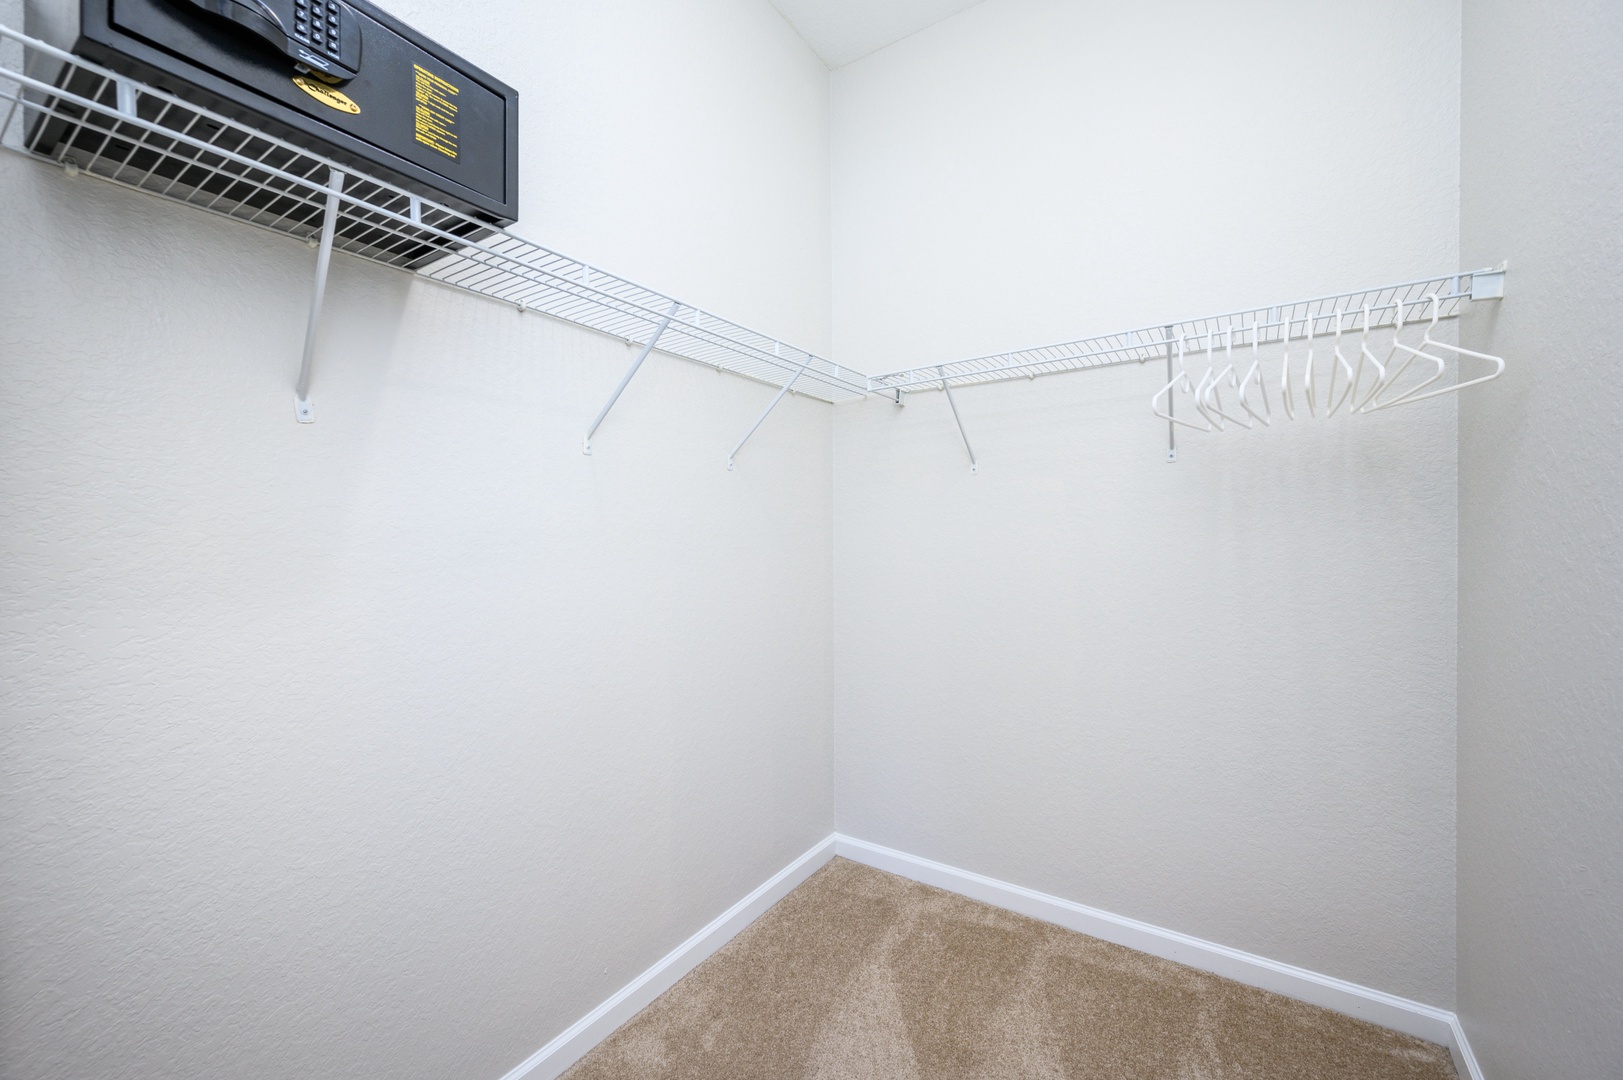 Primary Closet with Safe